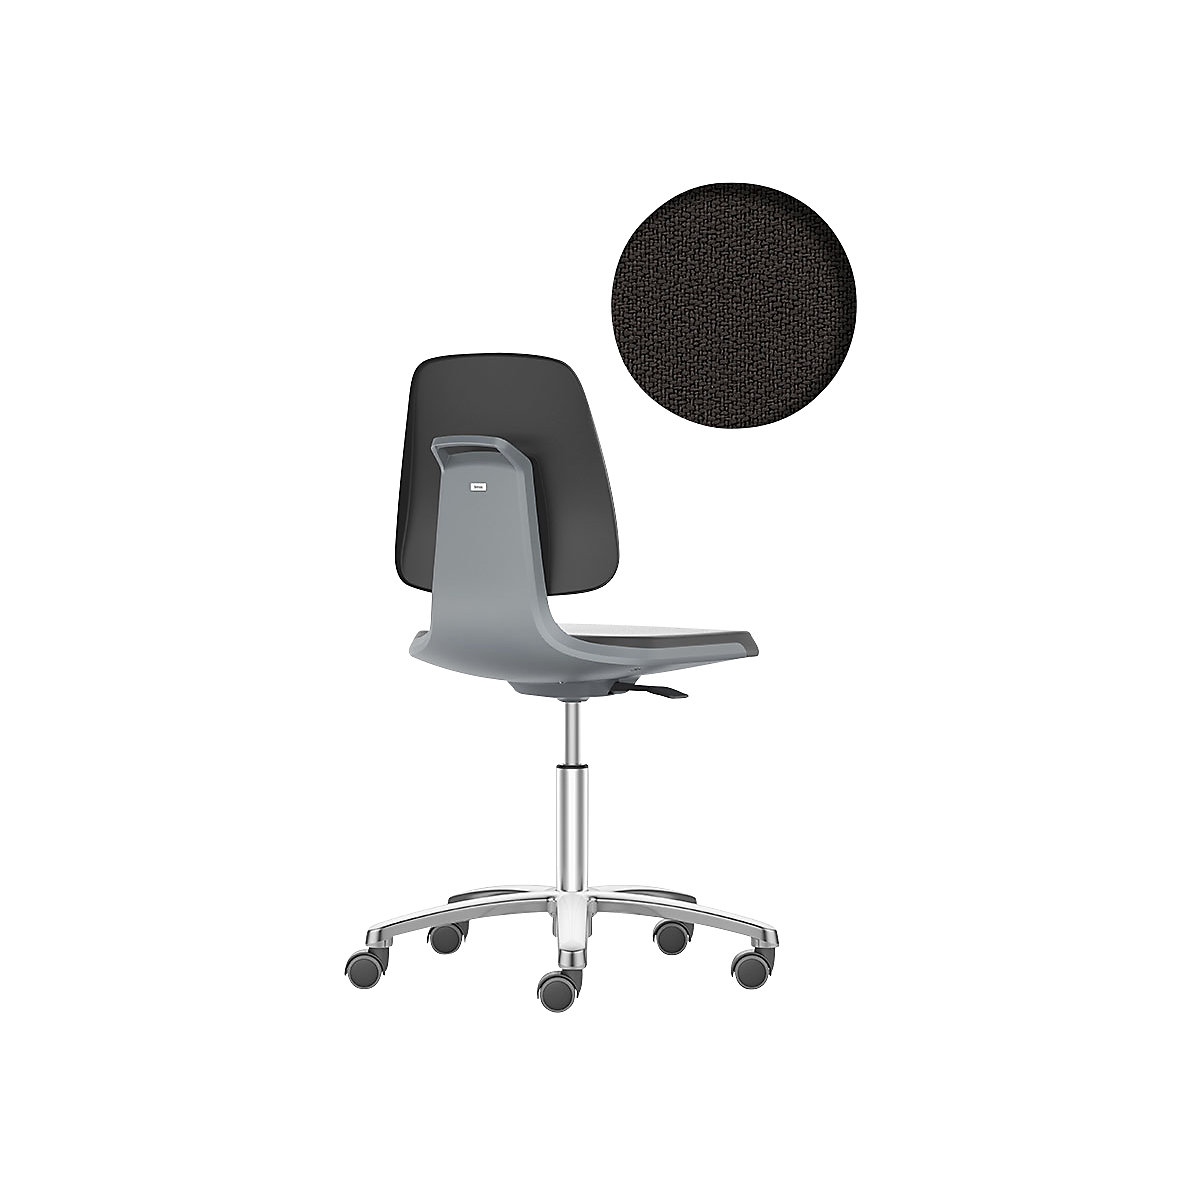 LABSIT industrial swivel chair – bimos, five-star base with castors, fabric upholstered seat, charcoal-29